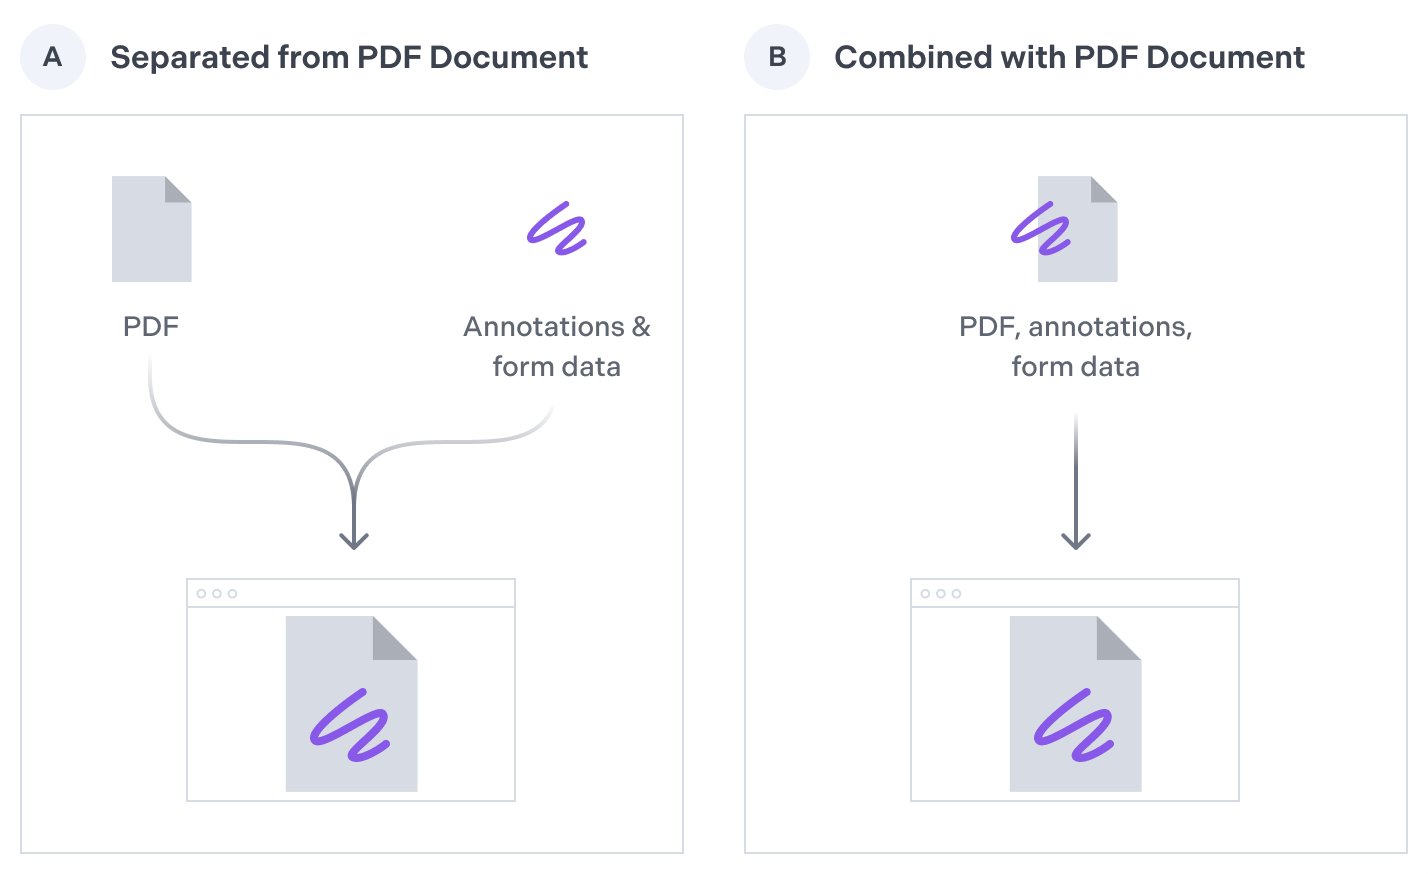 Separating annotations and form data from the underlying document